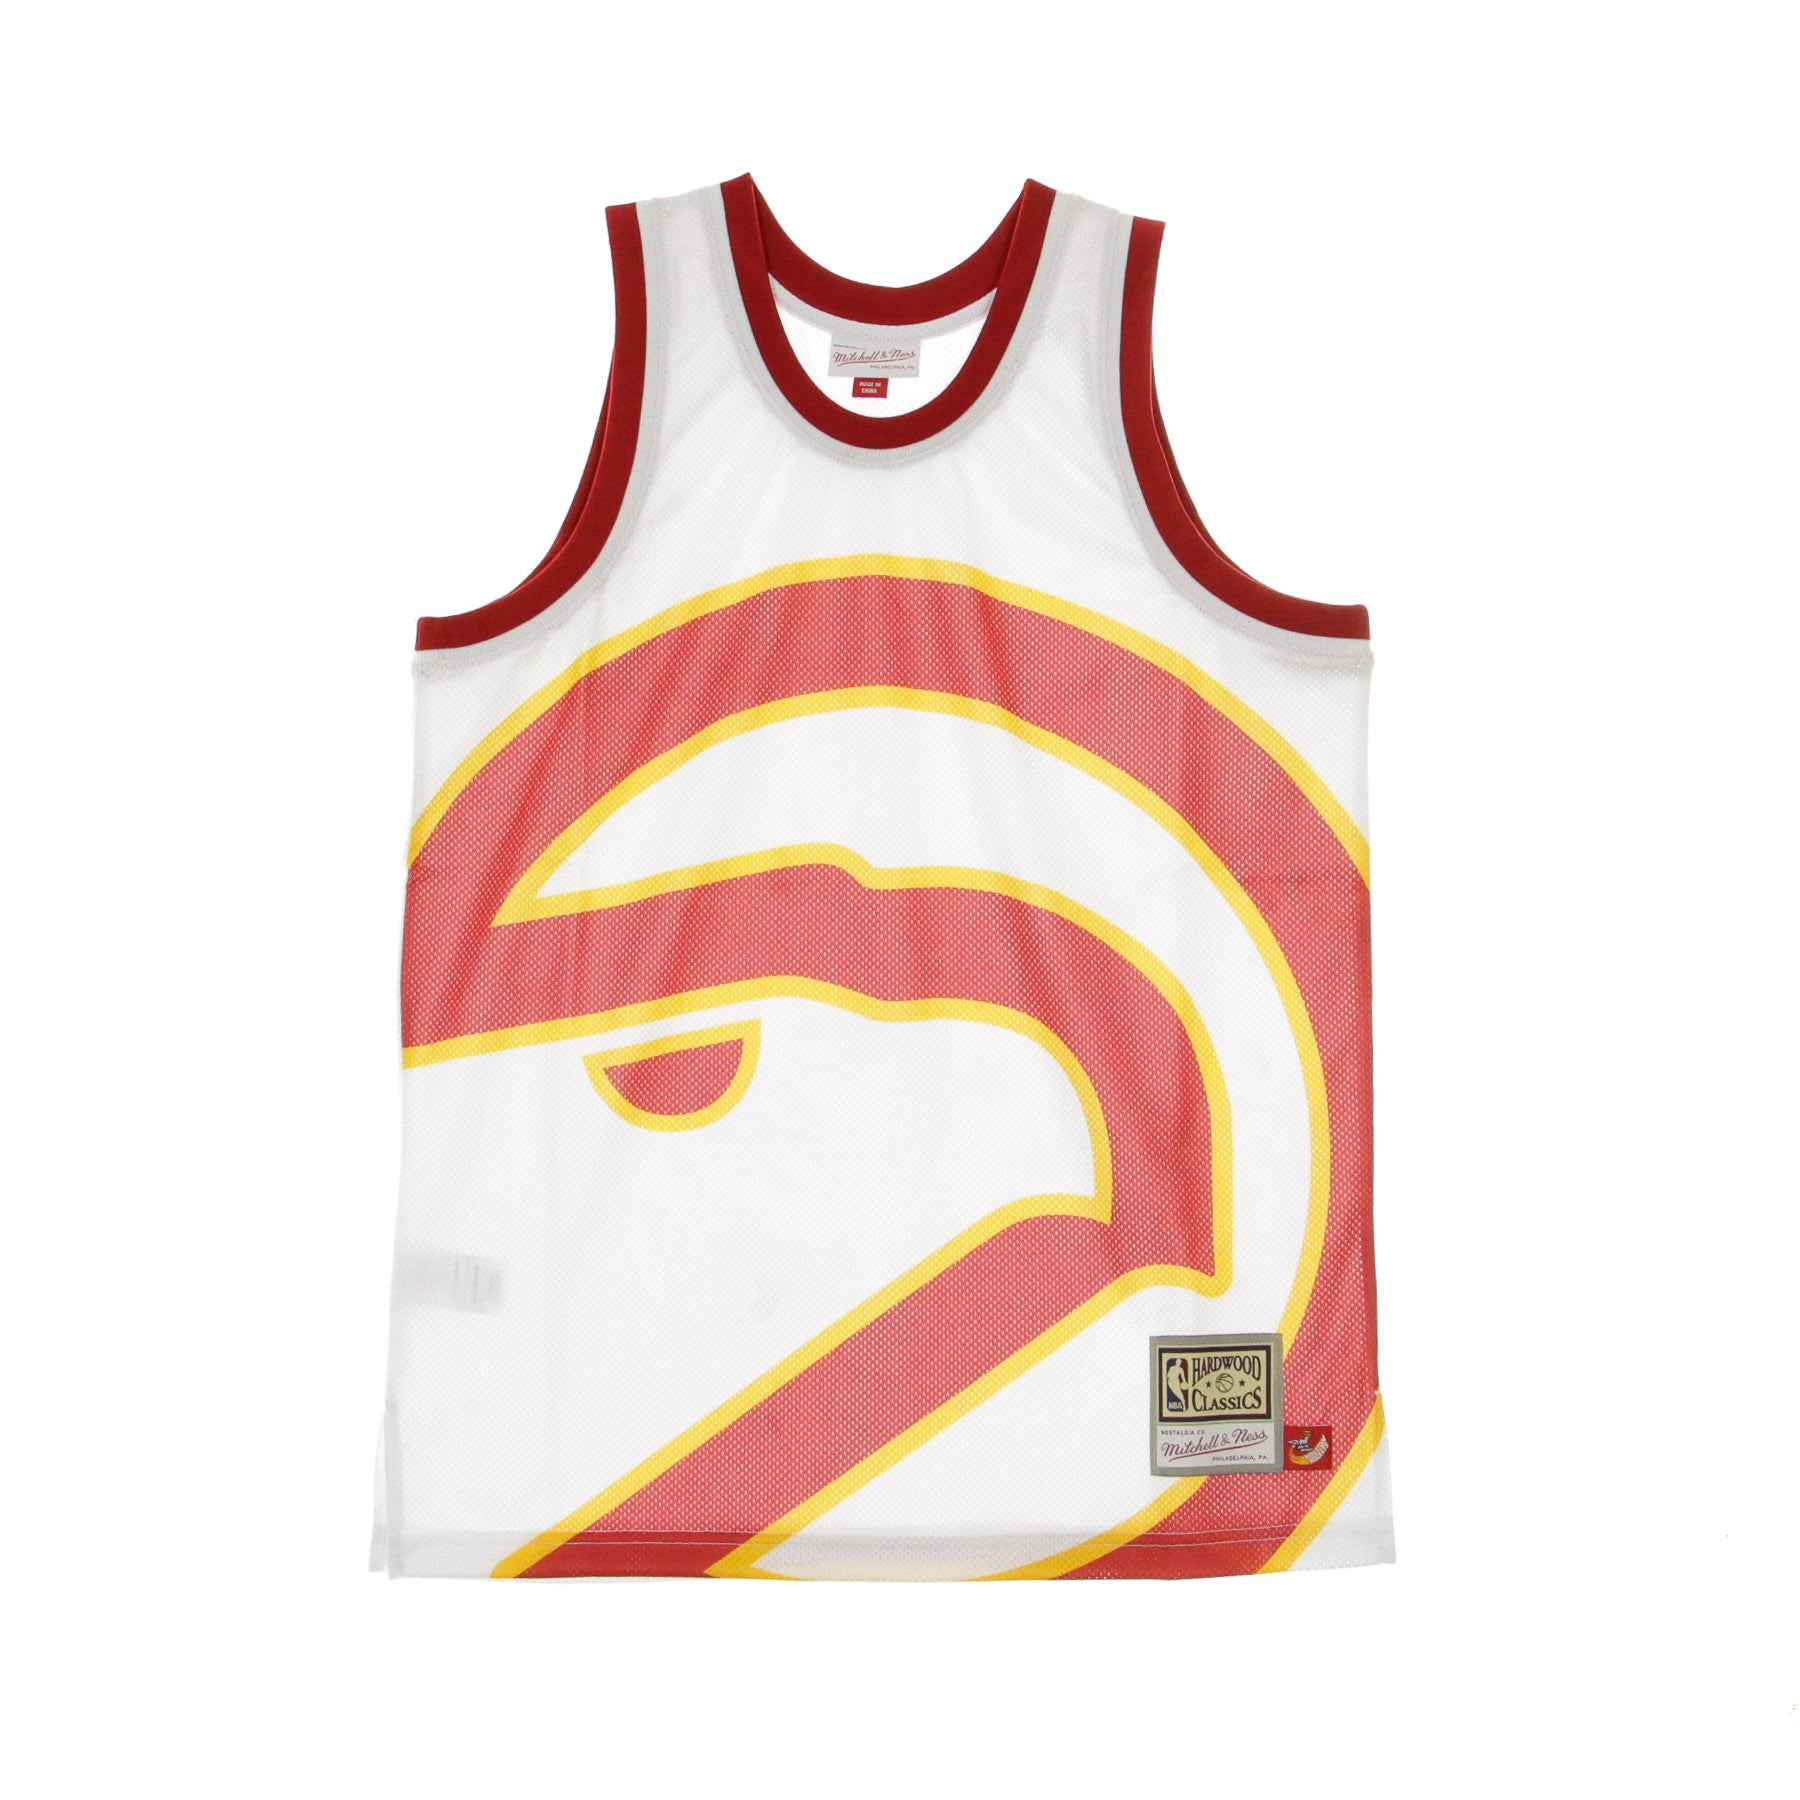 Mitchell & Ness, Canotta Tipo Basket Uomo Nba Big Face Jersey Atlhaw, Original Team Colors